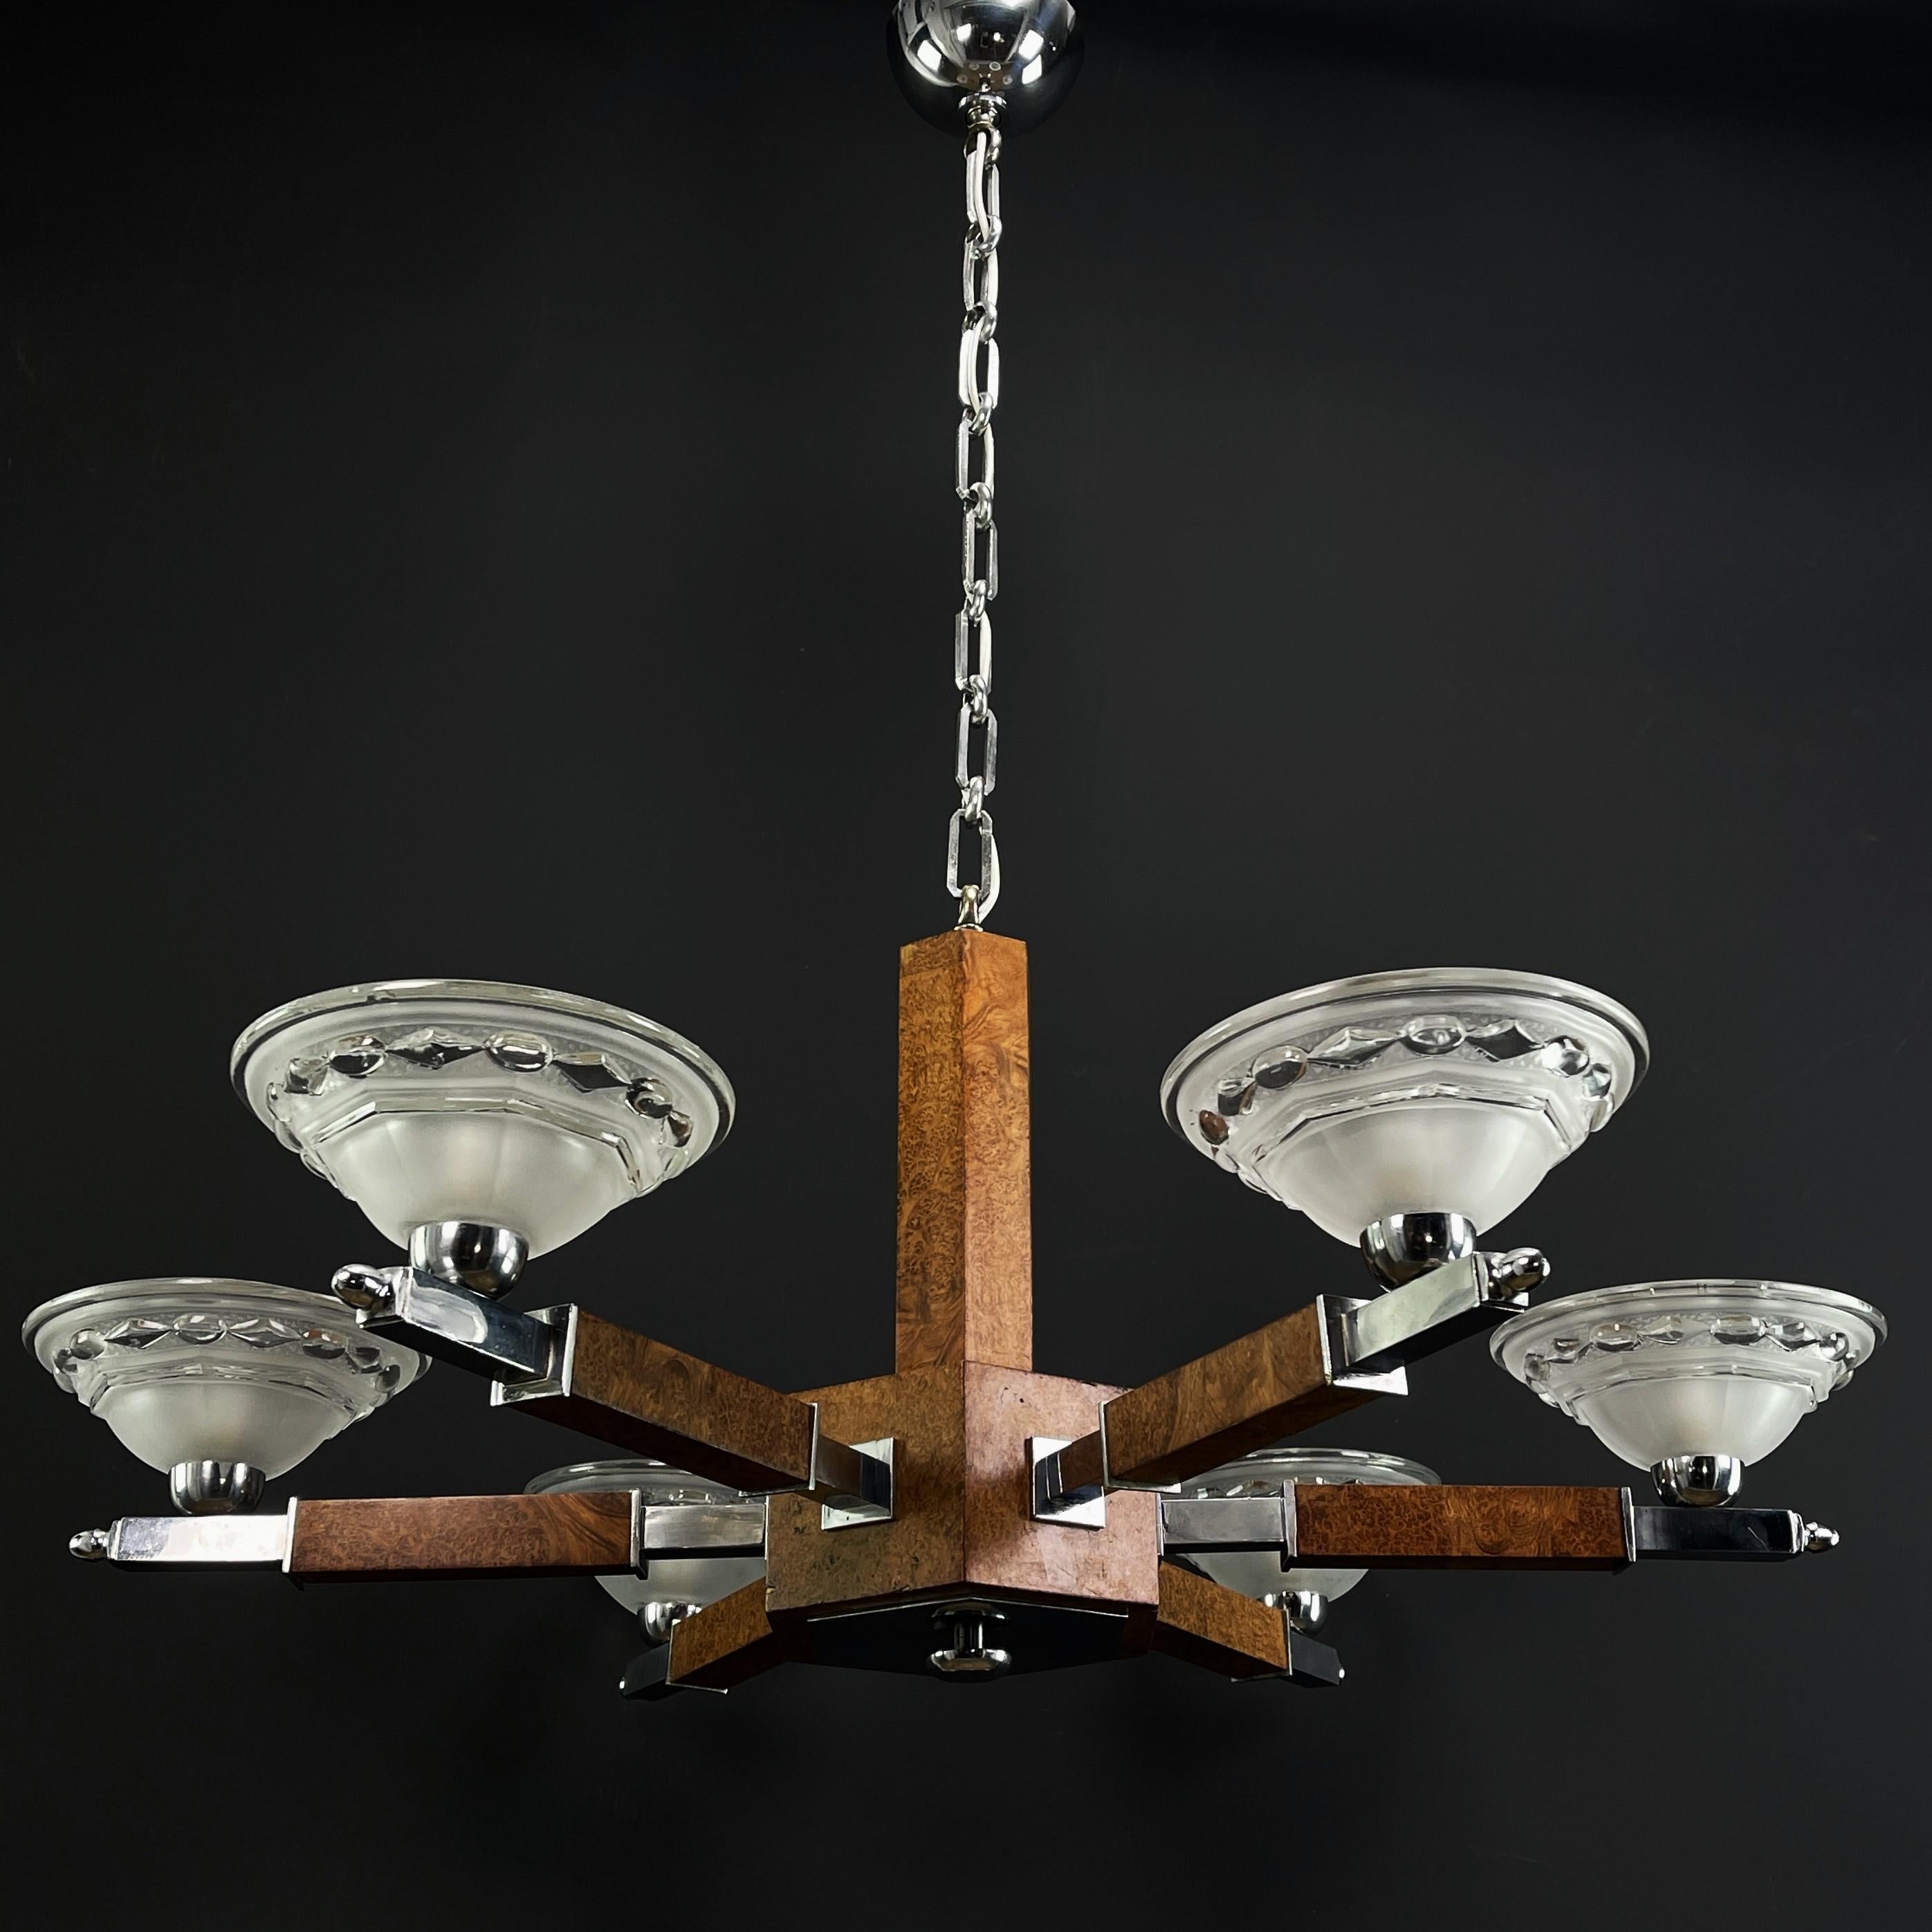 Art Deco chandelier - ceiling lamp wood chrome - 1930s

This stunning Art Deco chandelier from the 1930s is an outstanding example of the elegance and sophistication of the Art Deco style. With its combination of chrome-plated metal, burl wood